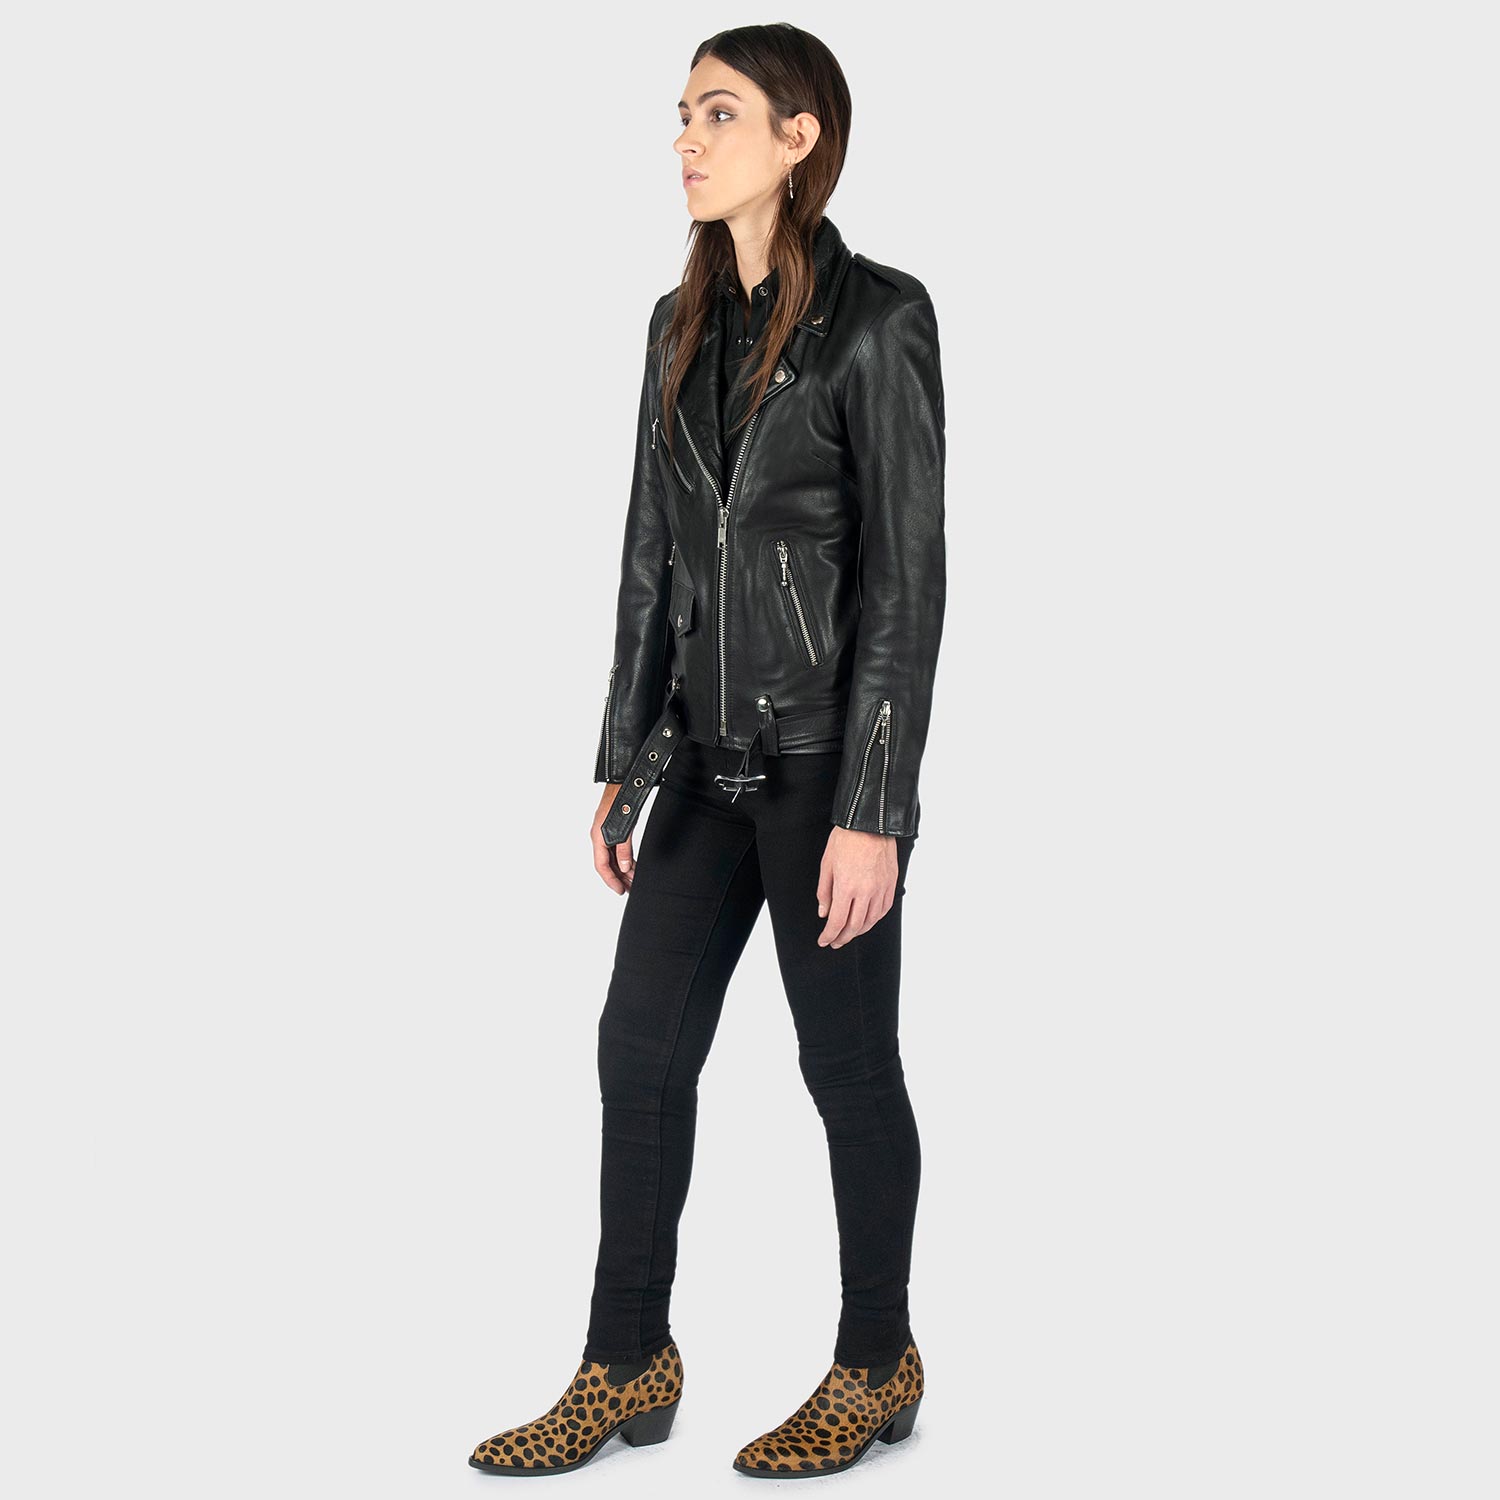 To Straight Leather Hell Black Jacket Nickel and - Apparel Oversized Commando |